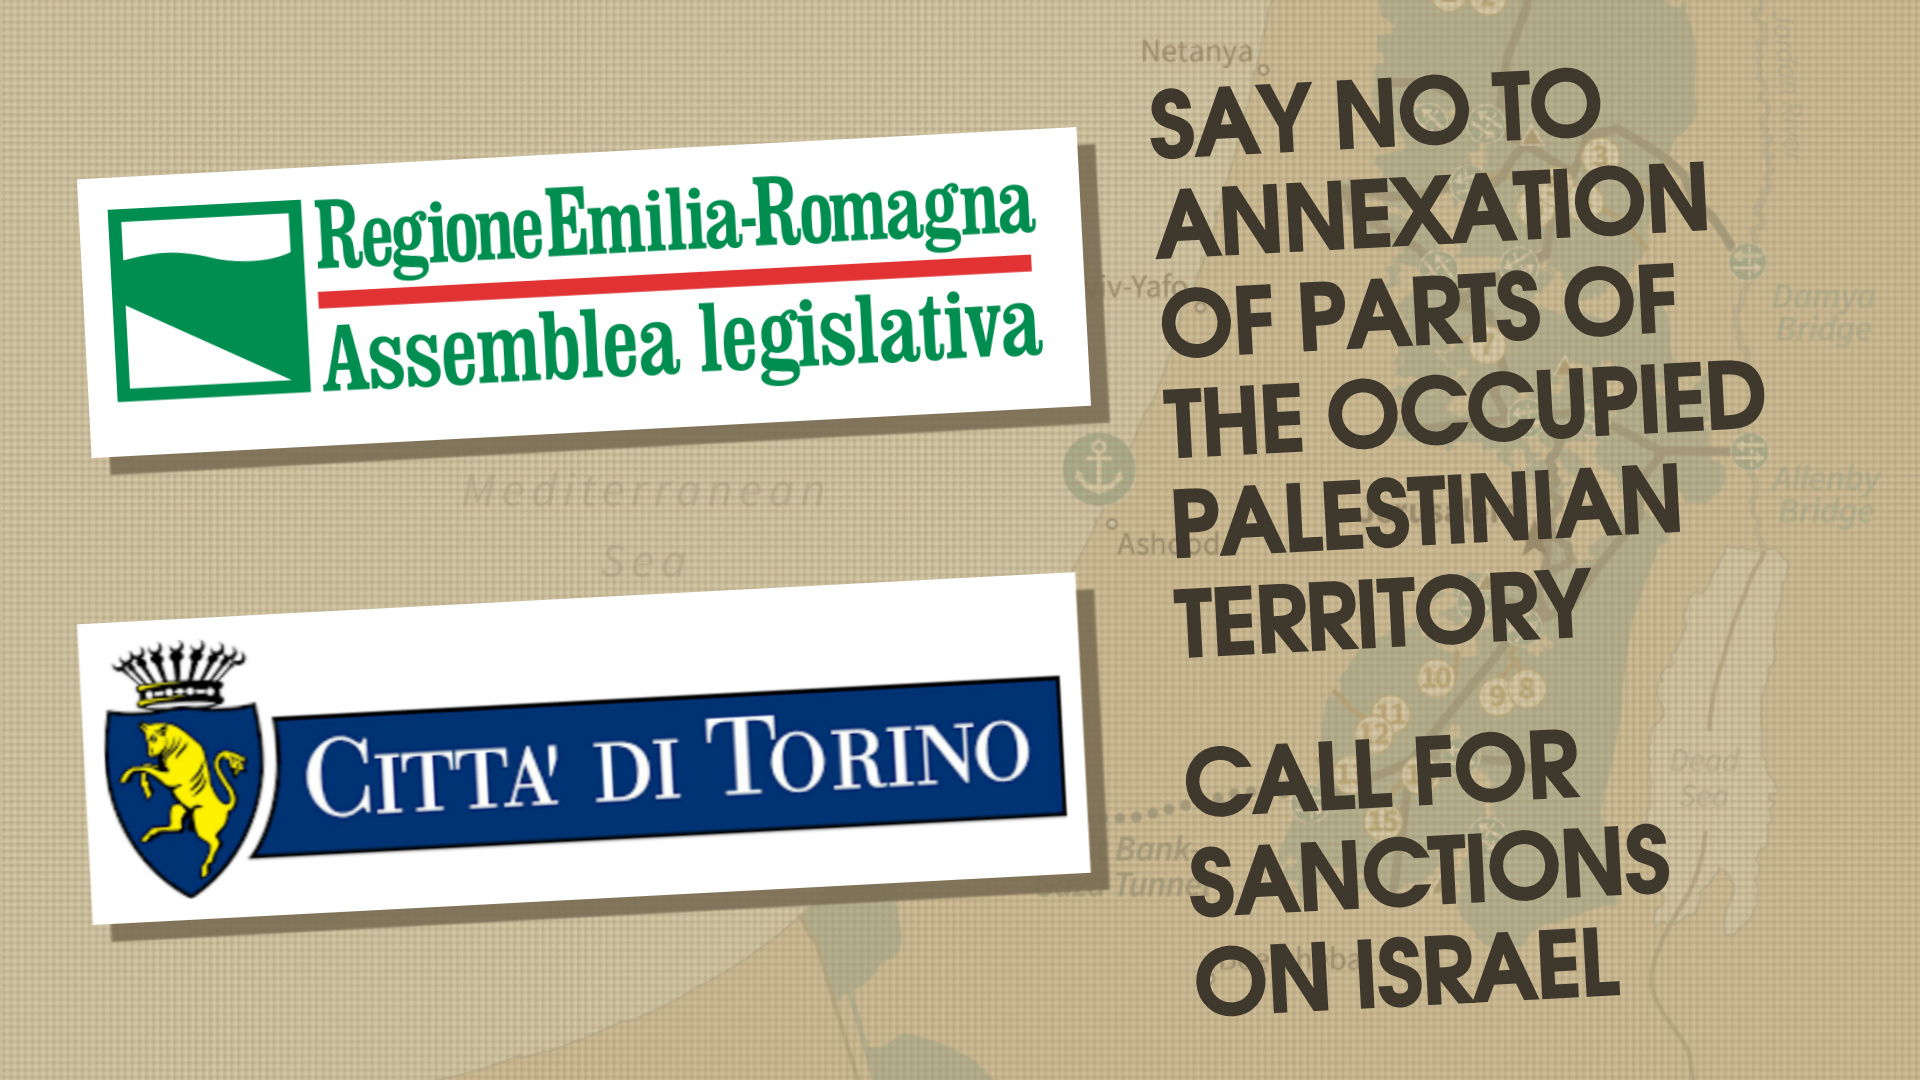 Italian Regional and City Councils Call for Sanctions Against Israel’s Annexation Plans and Violations of International Law